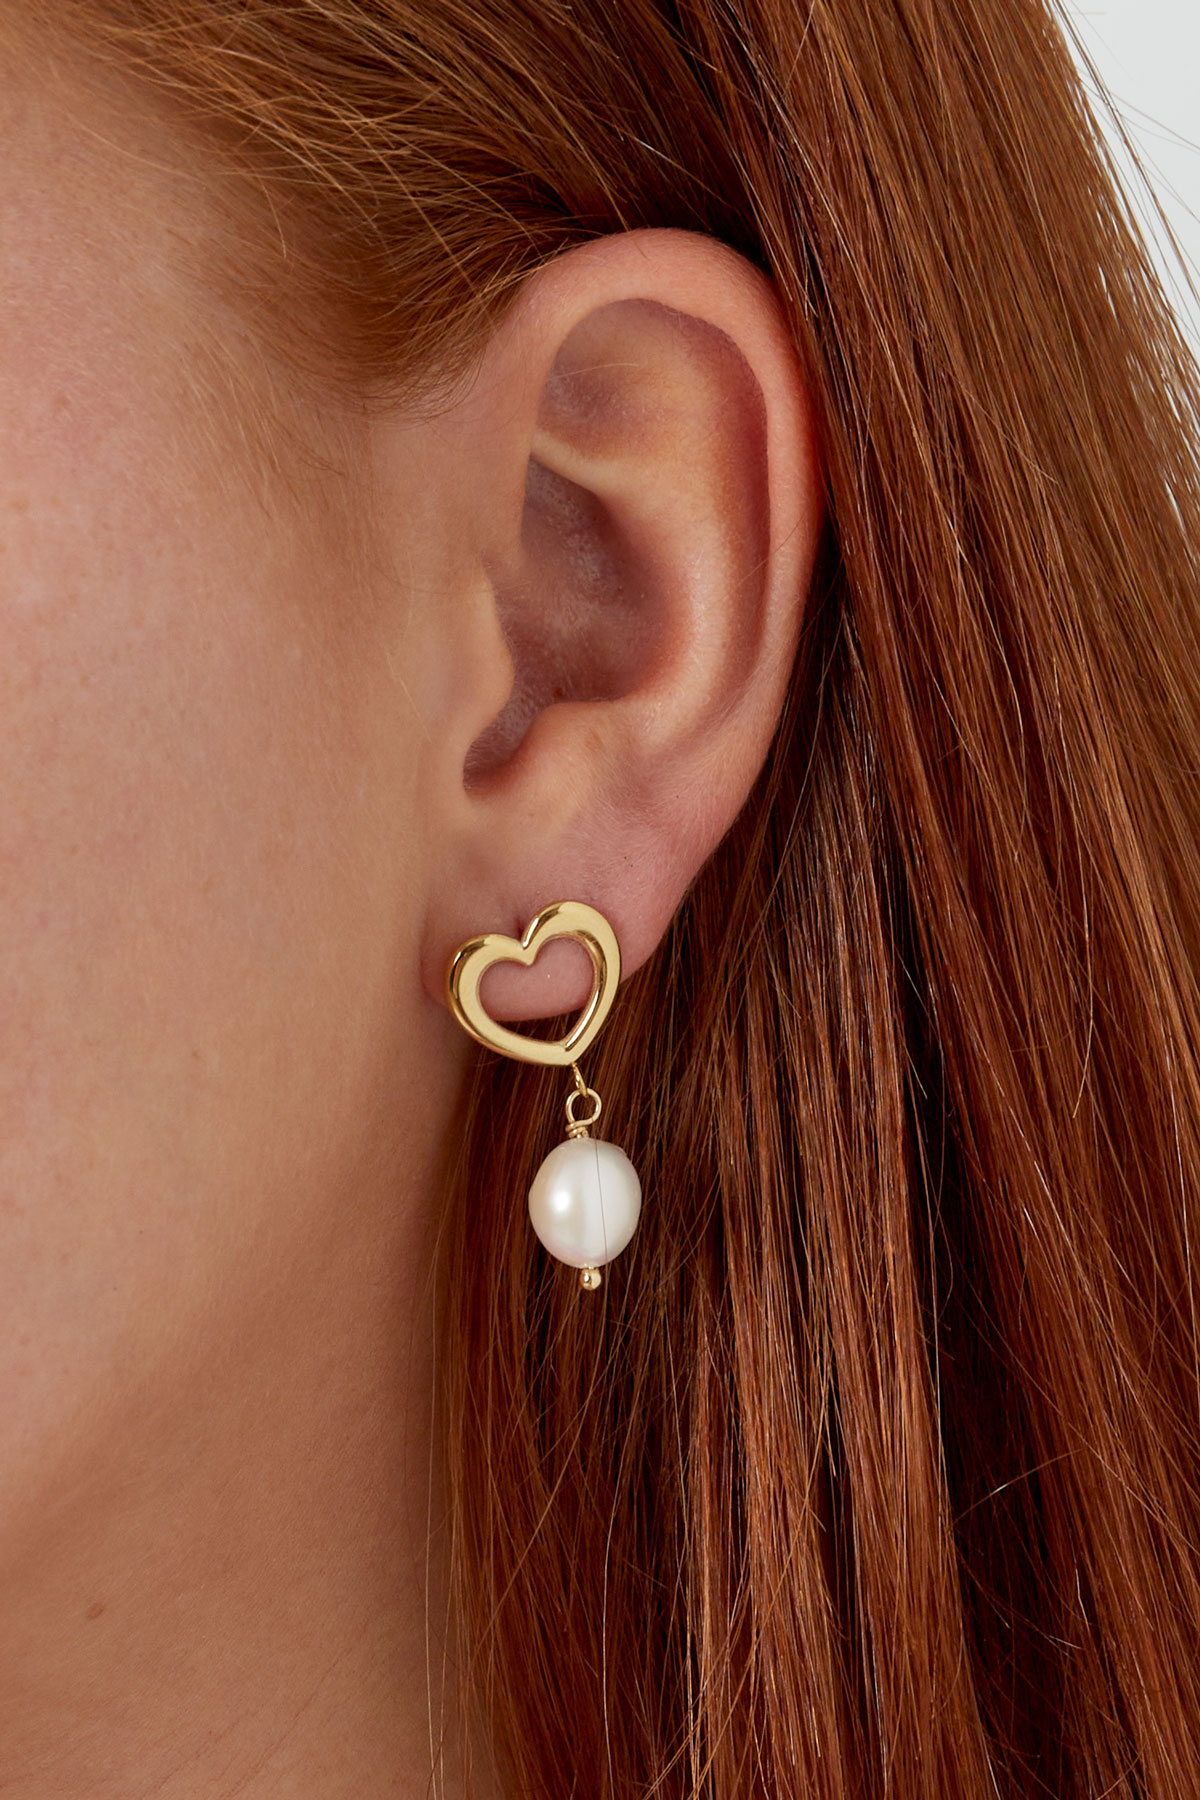 Earring heart with pearl detail - gold stainless steel h5 Picture3